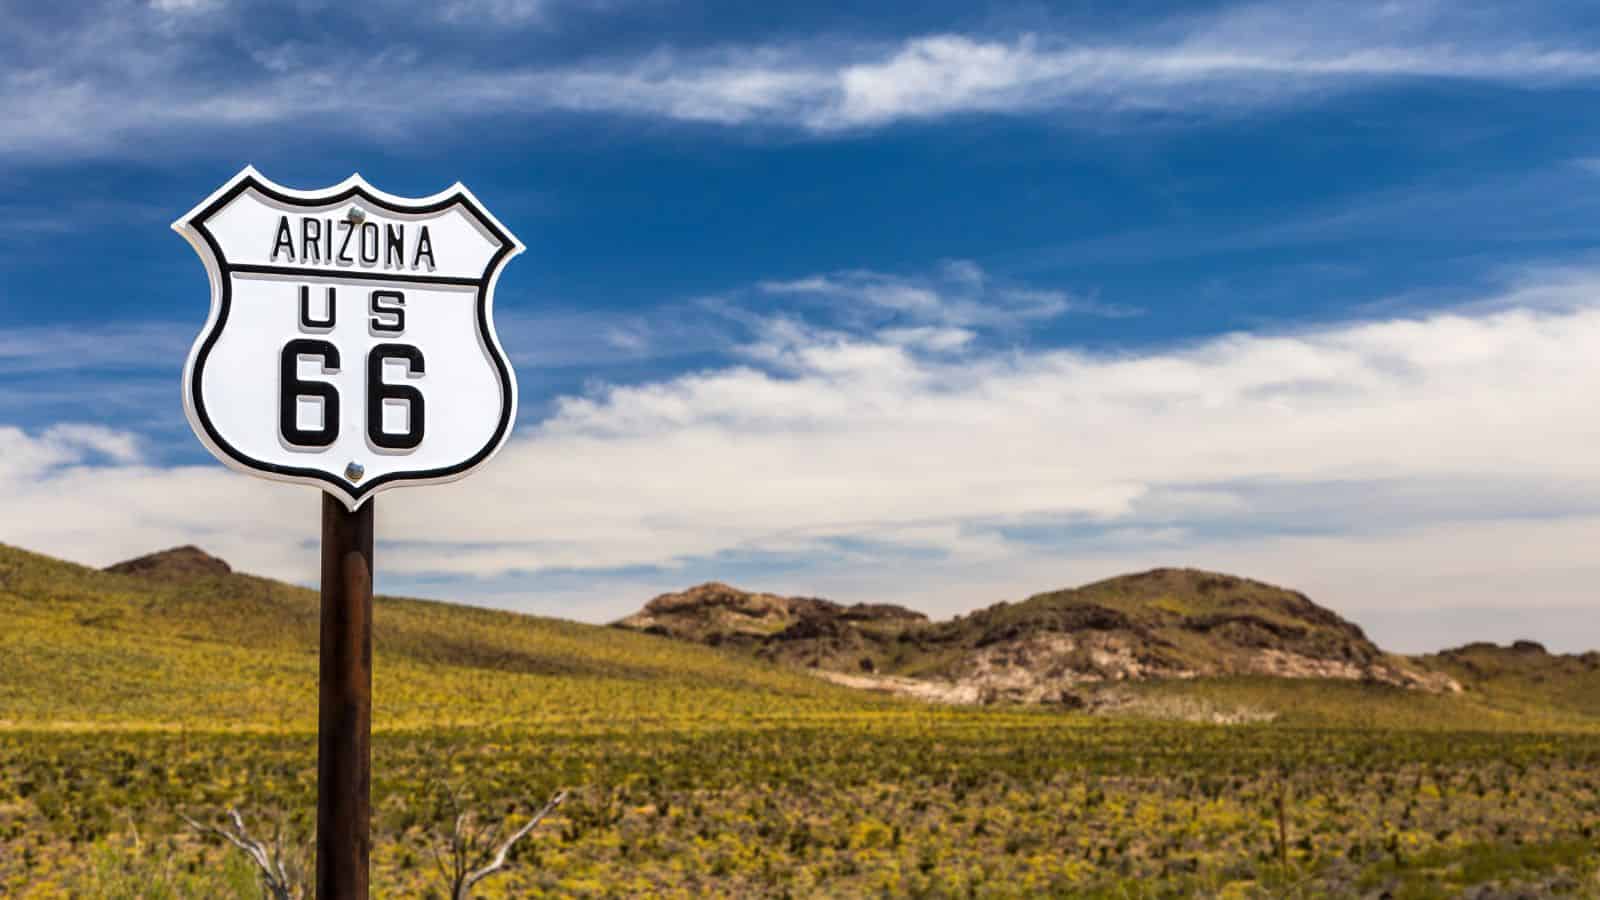 <p>Drive the legendary <a href="https://whatthefab.com/historic-route-66.html" rel="follow">Route 66</a> and experience the nostalgia of classic Americana. This historic route takes you through eight states, offering a glimpse into the country’s rich cultural heritage.</p><p>From <a href="https://whatthefab.com/indoor-activities-chicago.html" rel="follow">Chicago</a>‘s skyscrapers to the <a href="https://whatthefab.com/arizona-state-parks.html" rel="follow">deserts of Arizona</a> and California’s beaches, historic Route 66 is a journey through time.</p><p>Stop at iconic landmarks like the Cadillac Ranch in Texas, the Gateway Arch in St. Louis, and the Santa Monica Pier in California. Indulge in classic diner food, explore quirky roadside attractions, and soak up the vibrant culture along the Mother Road.</p>